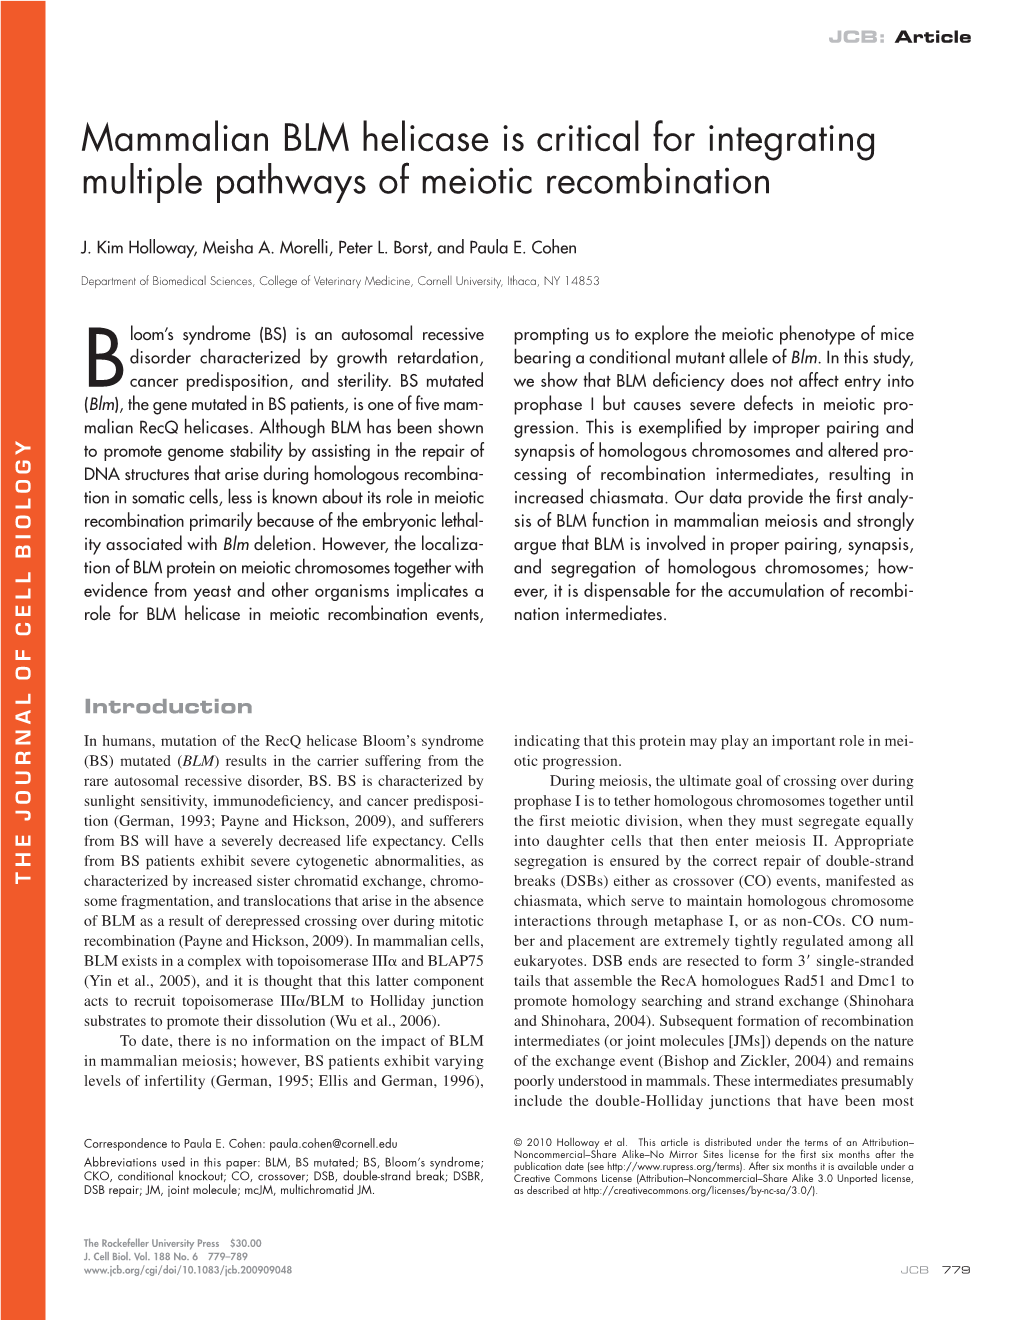 Mammalian BLM Helicase Is Critical for Integrating Multiple Pathways of Meiotic Recombination